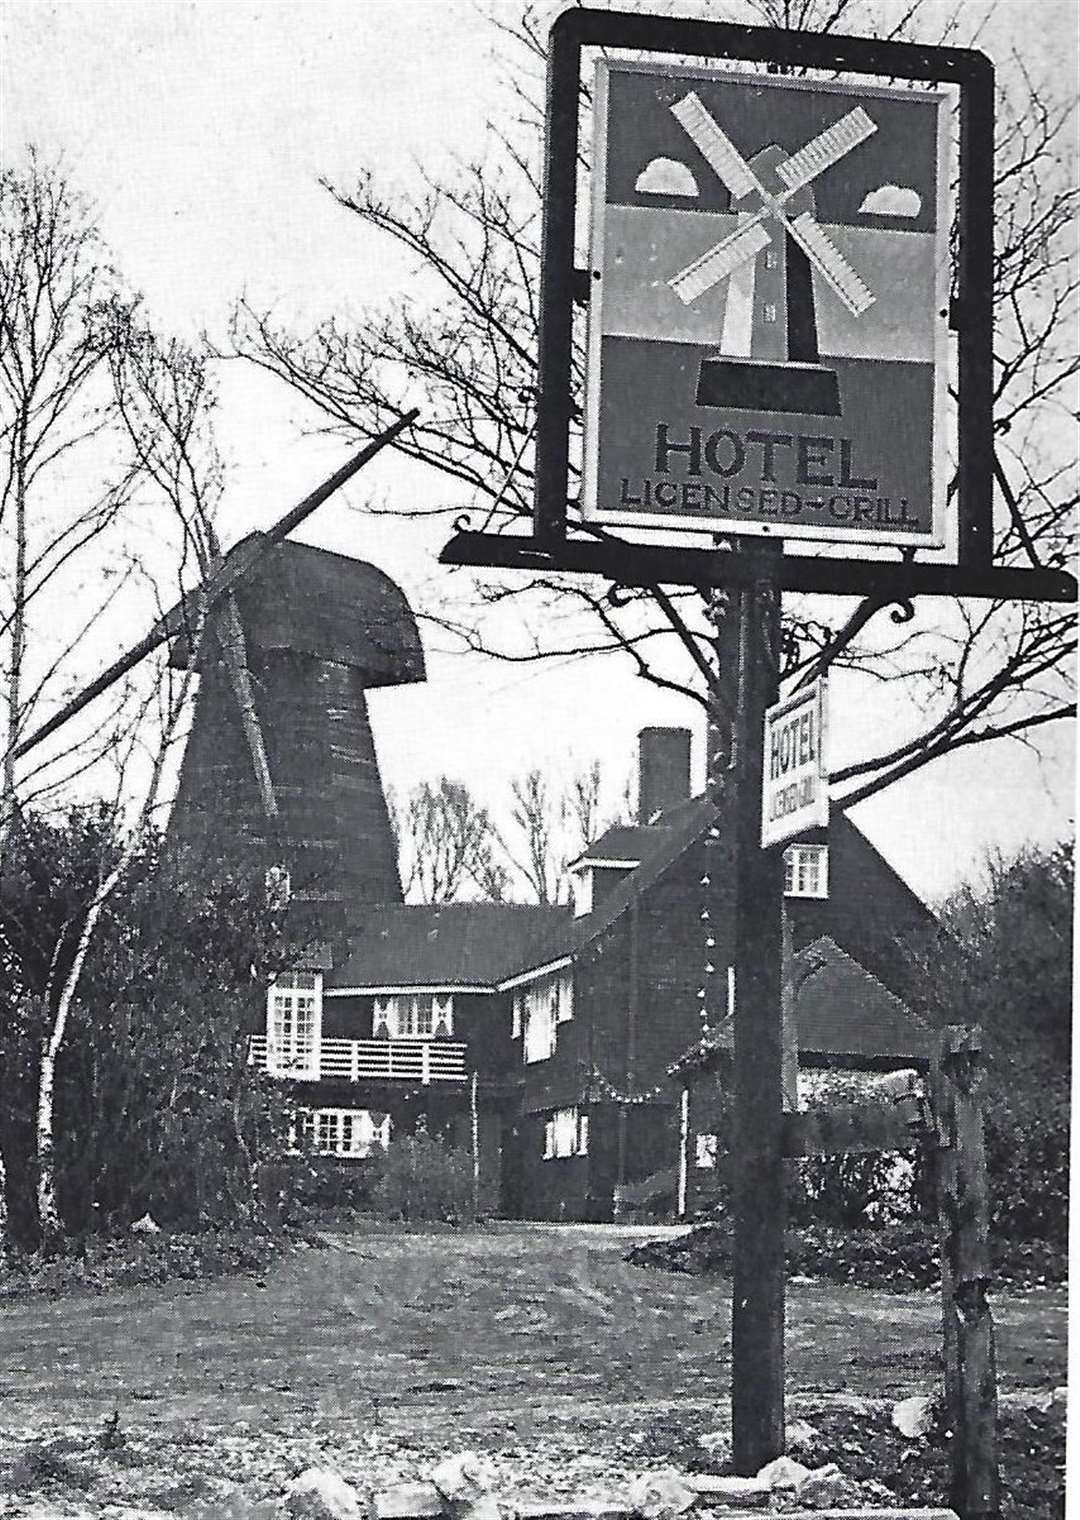 The Black Mill in Whistable pictured in April, 1964, when it was a country club and hotel